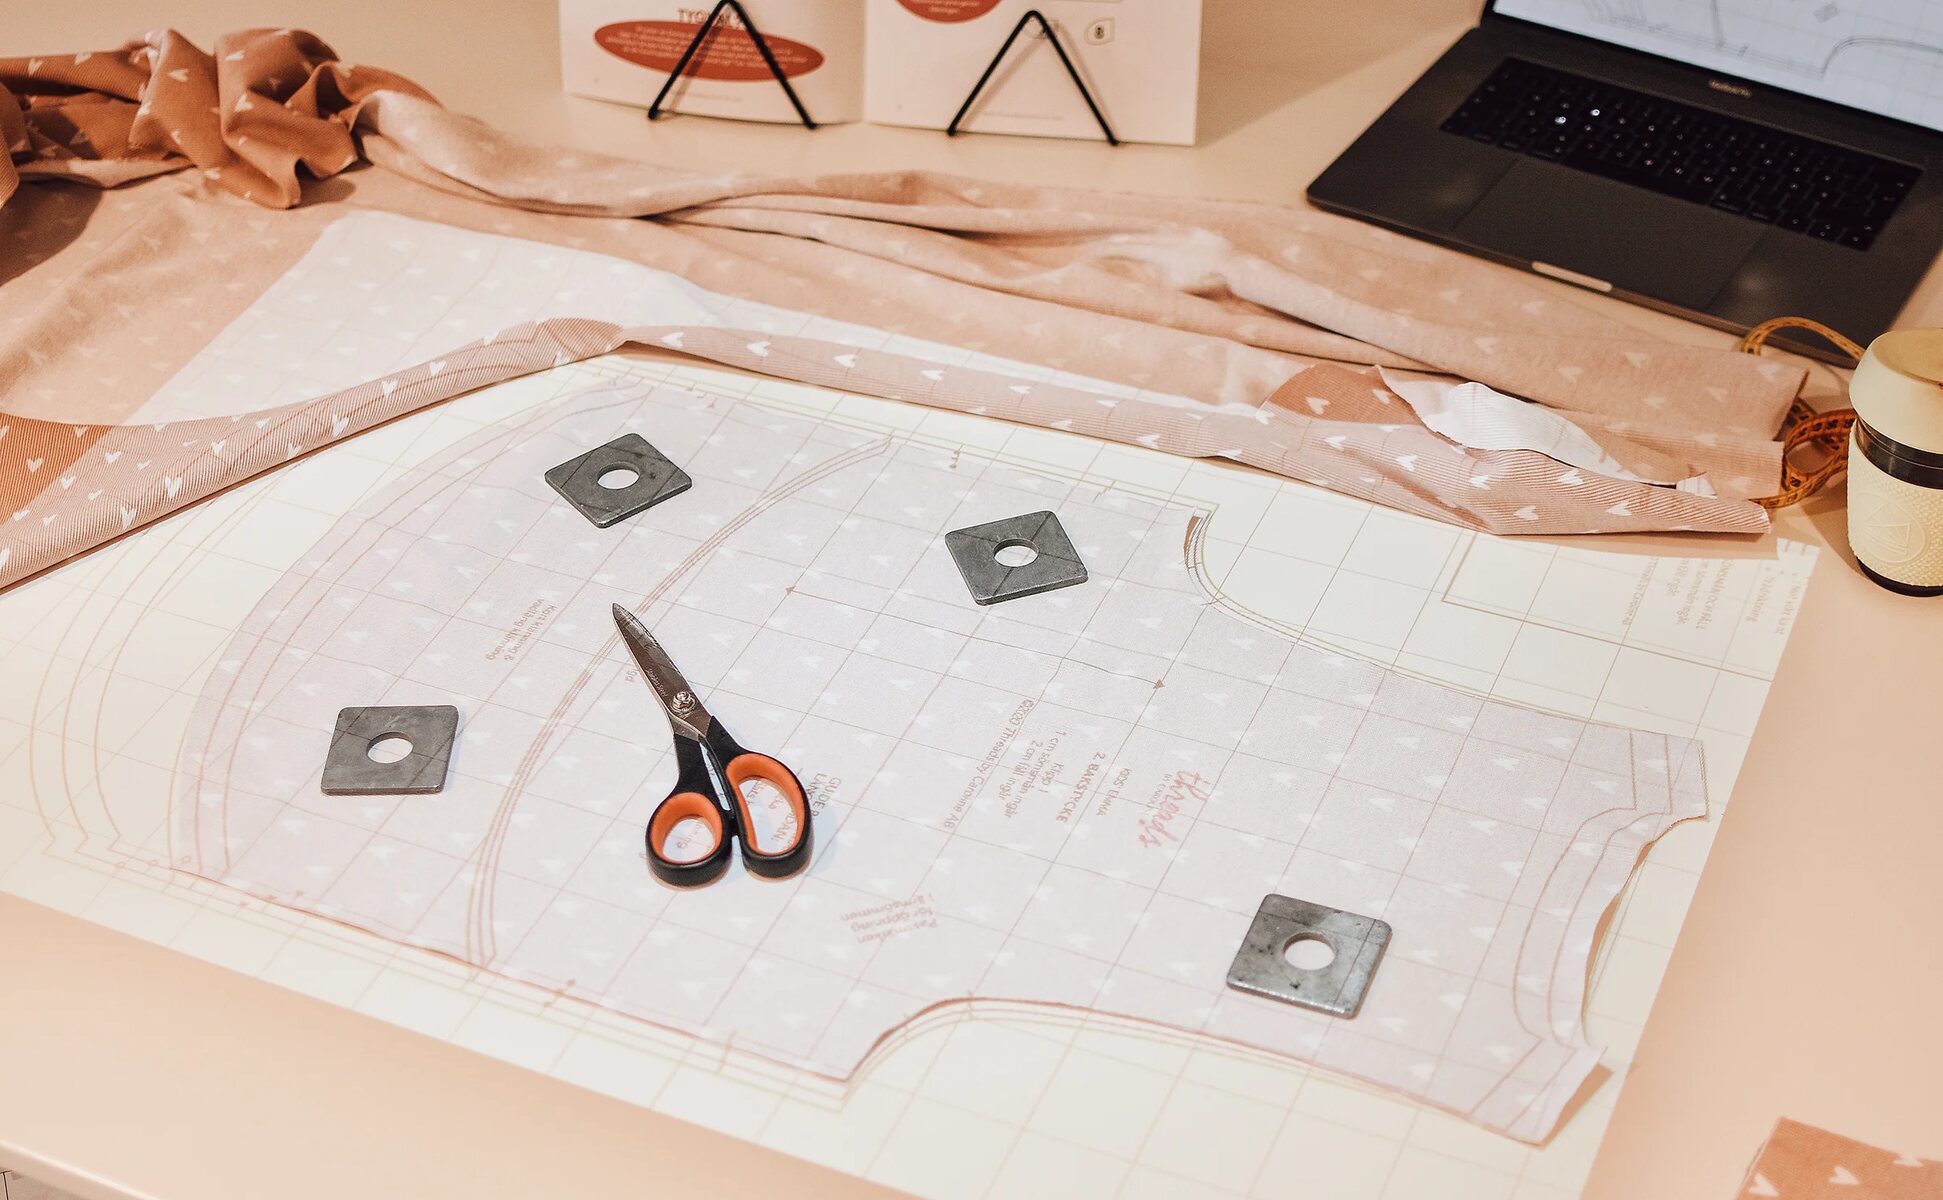 How To Use Projector For Sewing Patterns